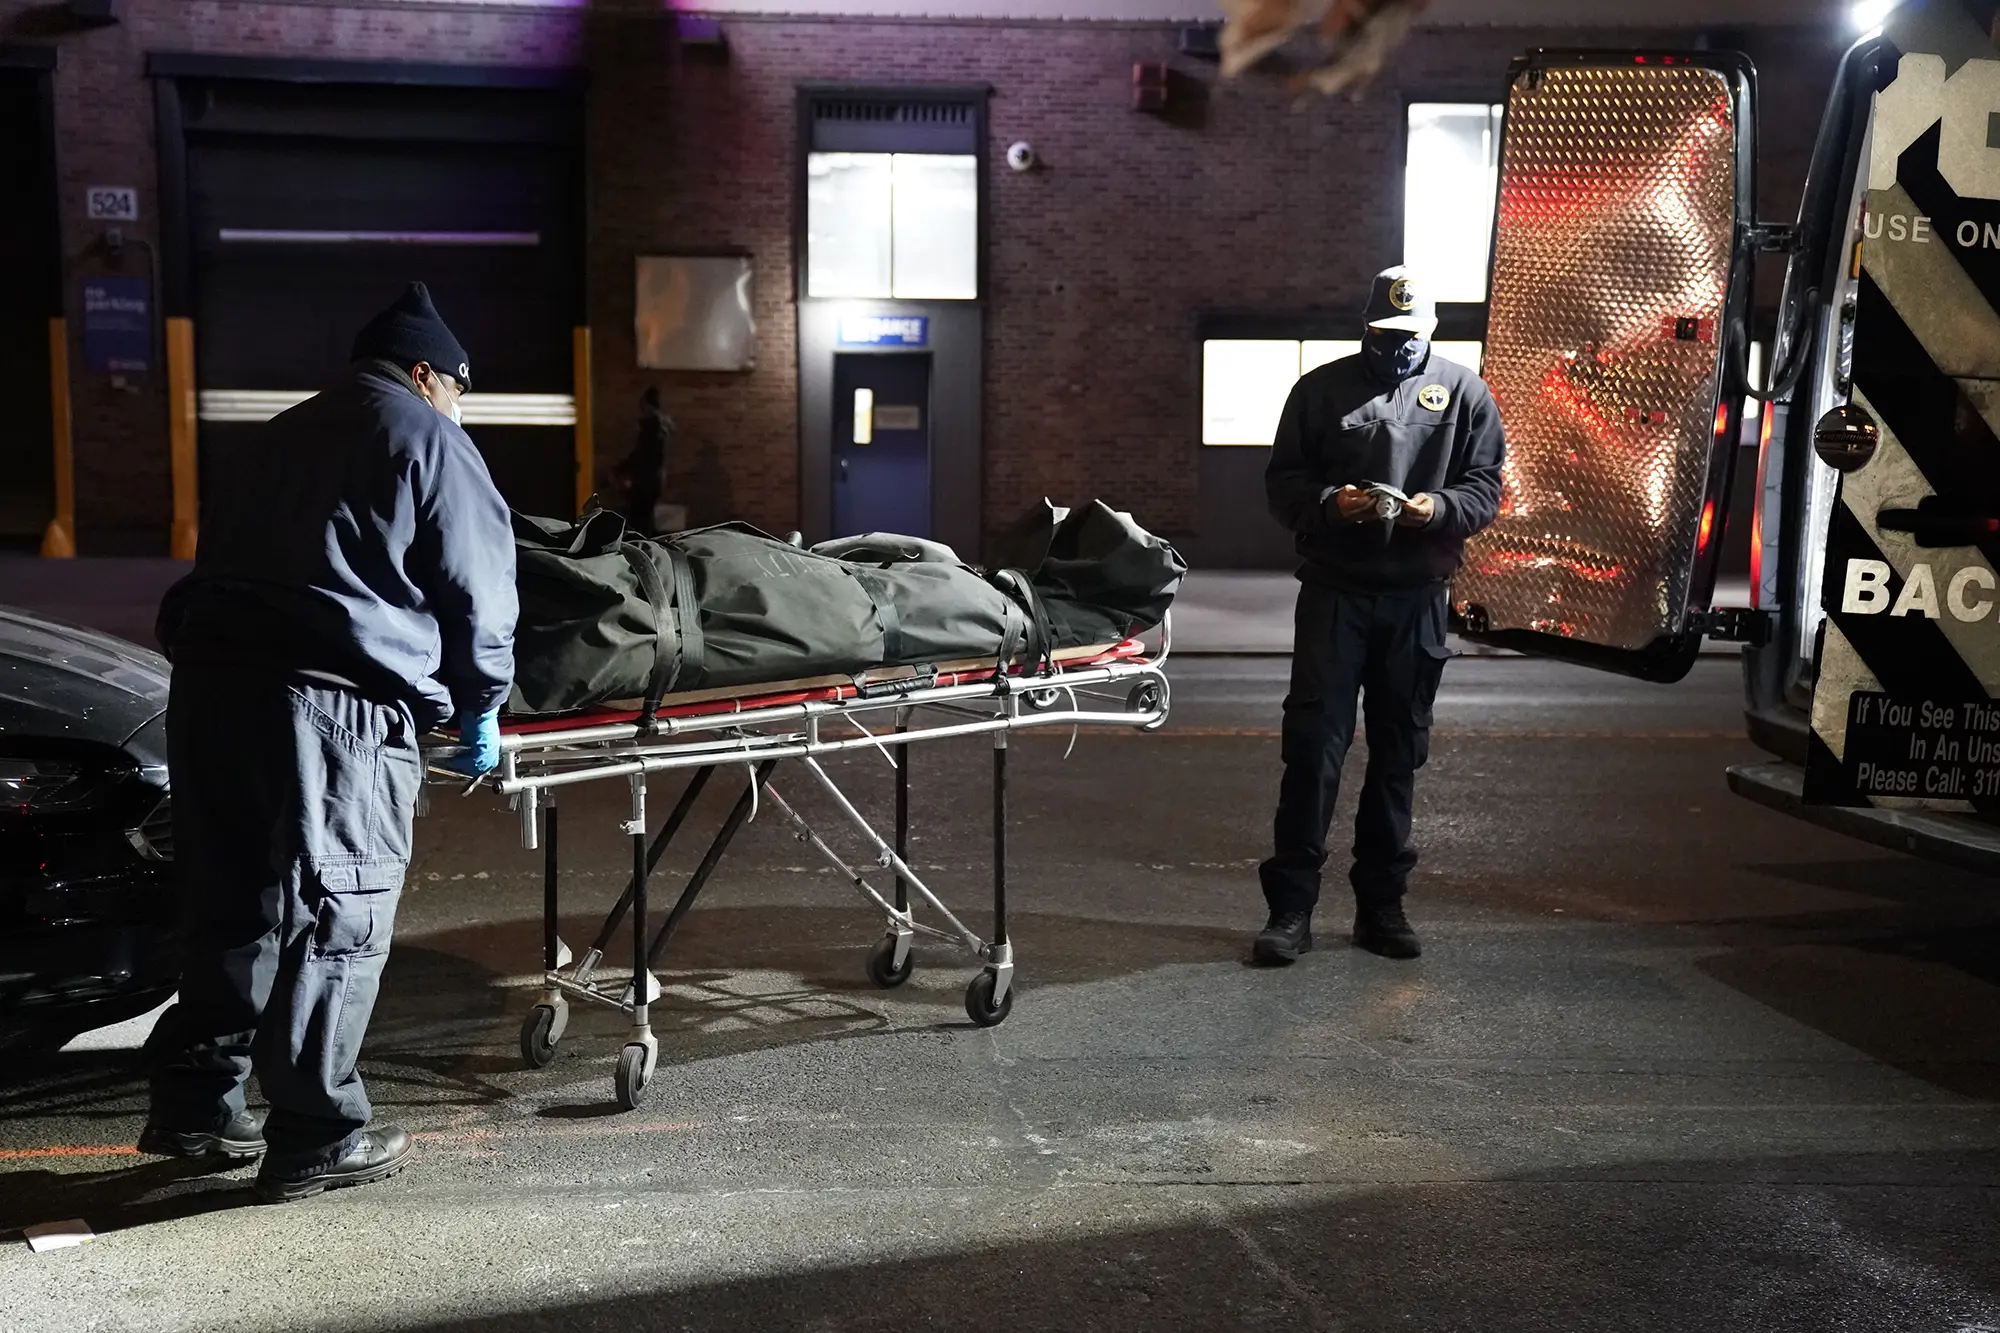 An elderly woman and her son's decomposing bodies were found in an apartment in New York City